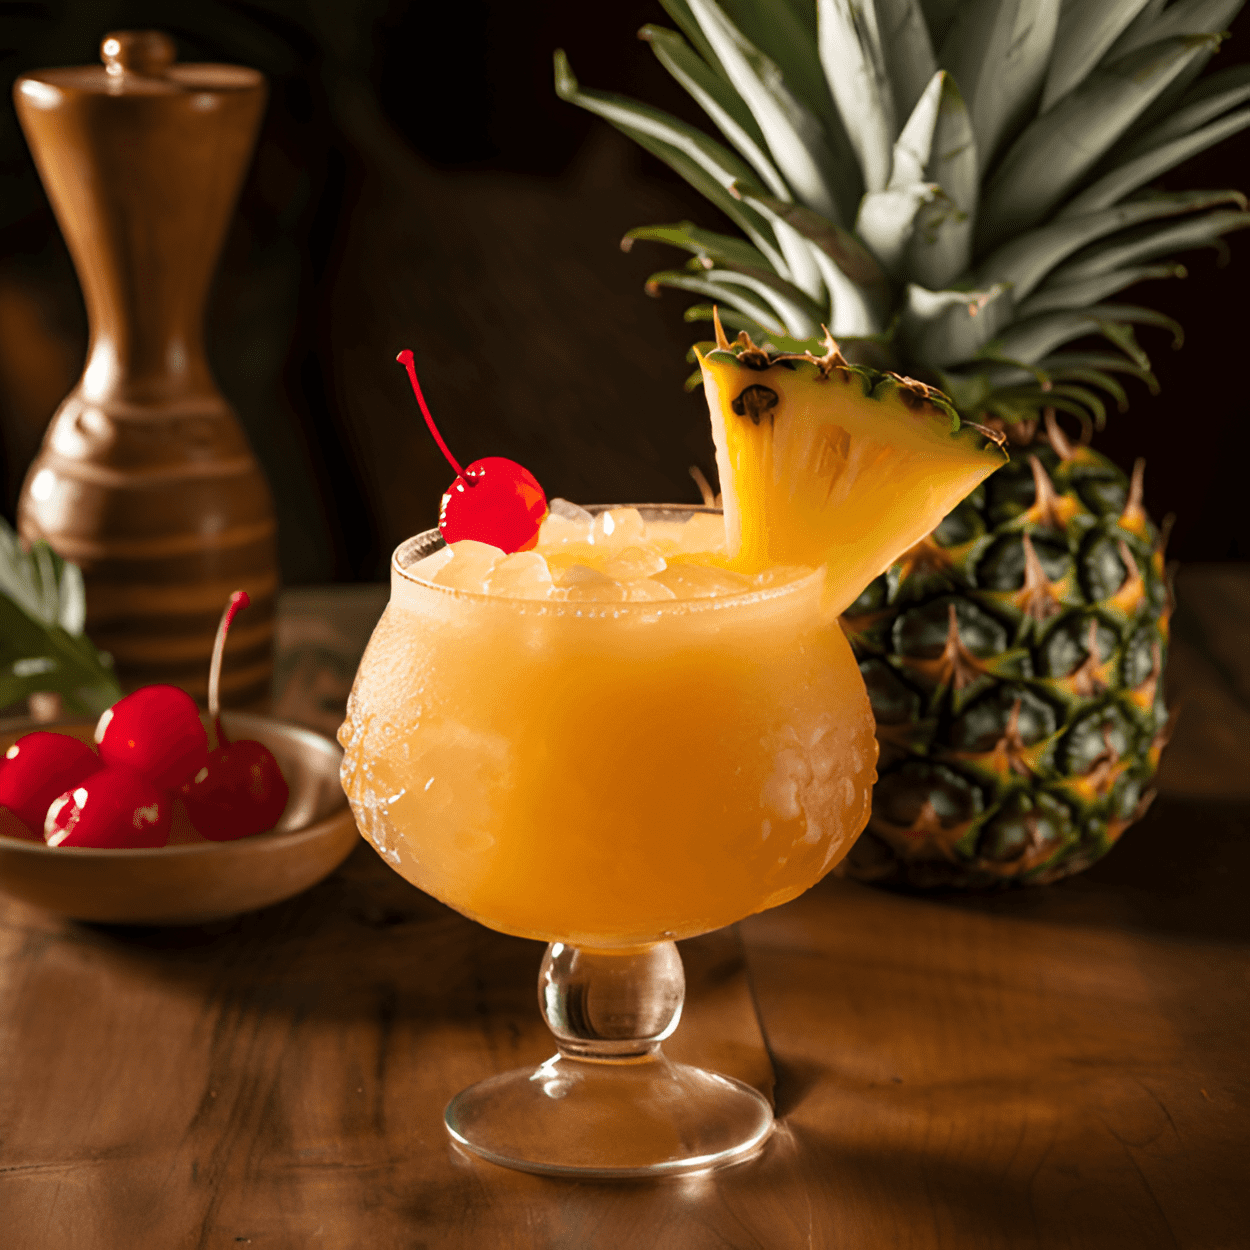 Bahama Breeze Ultimate Pineapple Cocktail Recipe - This cocktail is a sweet and tangy delight, with the tropical flavors of pineapple and coconut cream blending perfectly with the smooth rum. The hint of grenadine adds a touch of tartness that balances the sweetness, making it a refreshing and enjoyable drink.